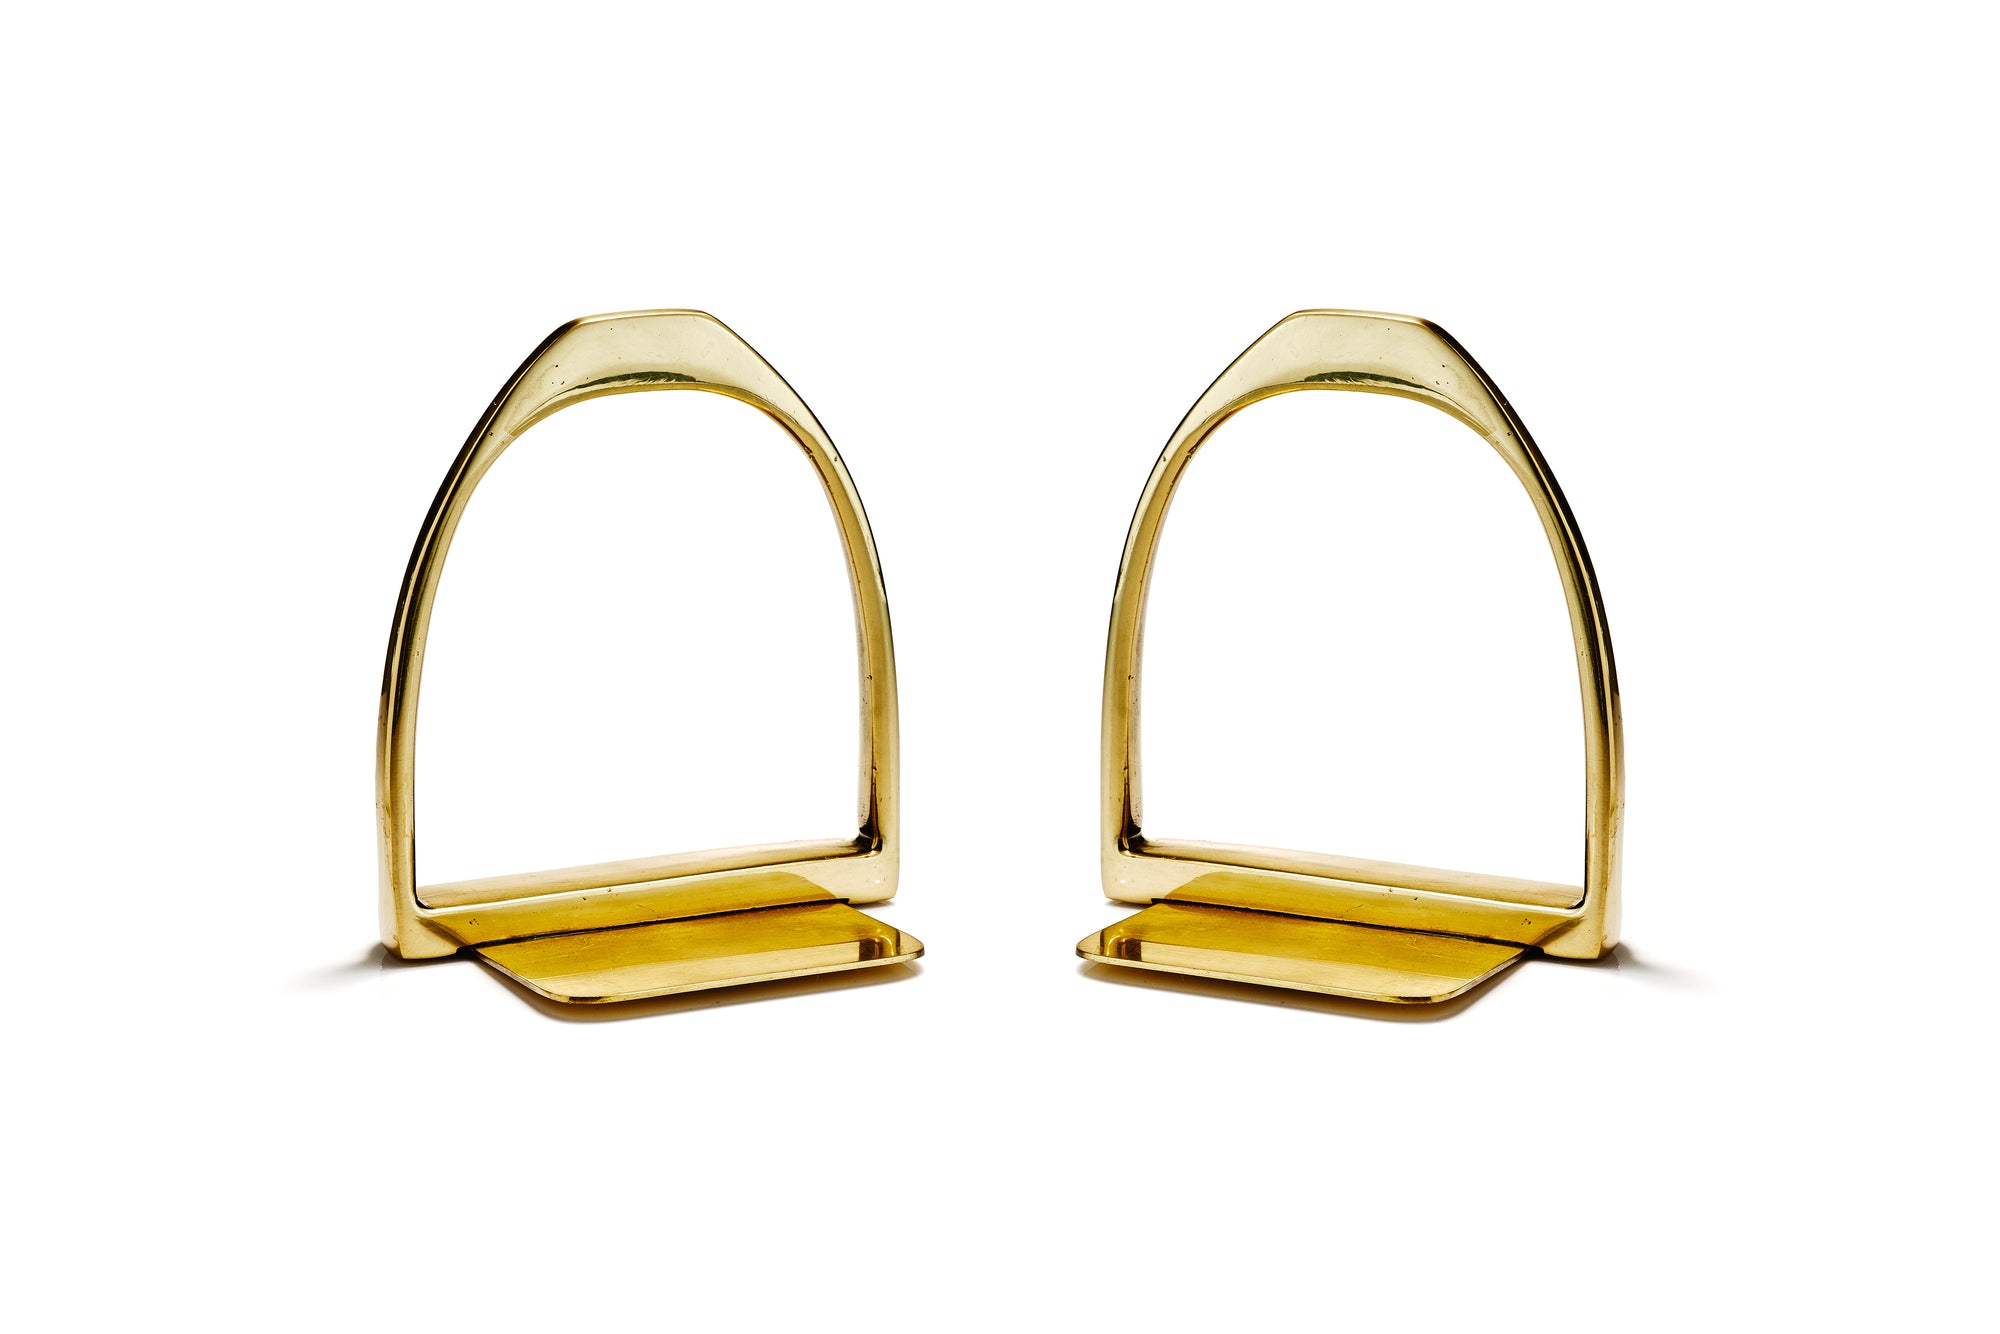 French Stirrup Bookends